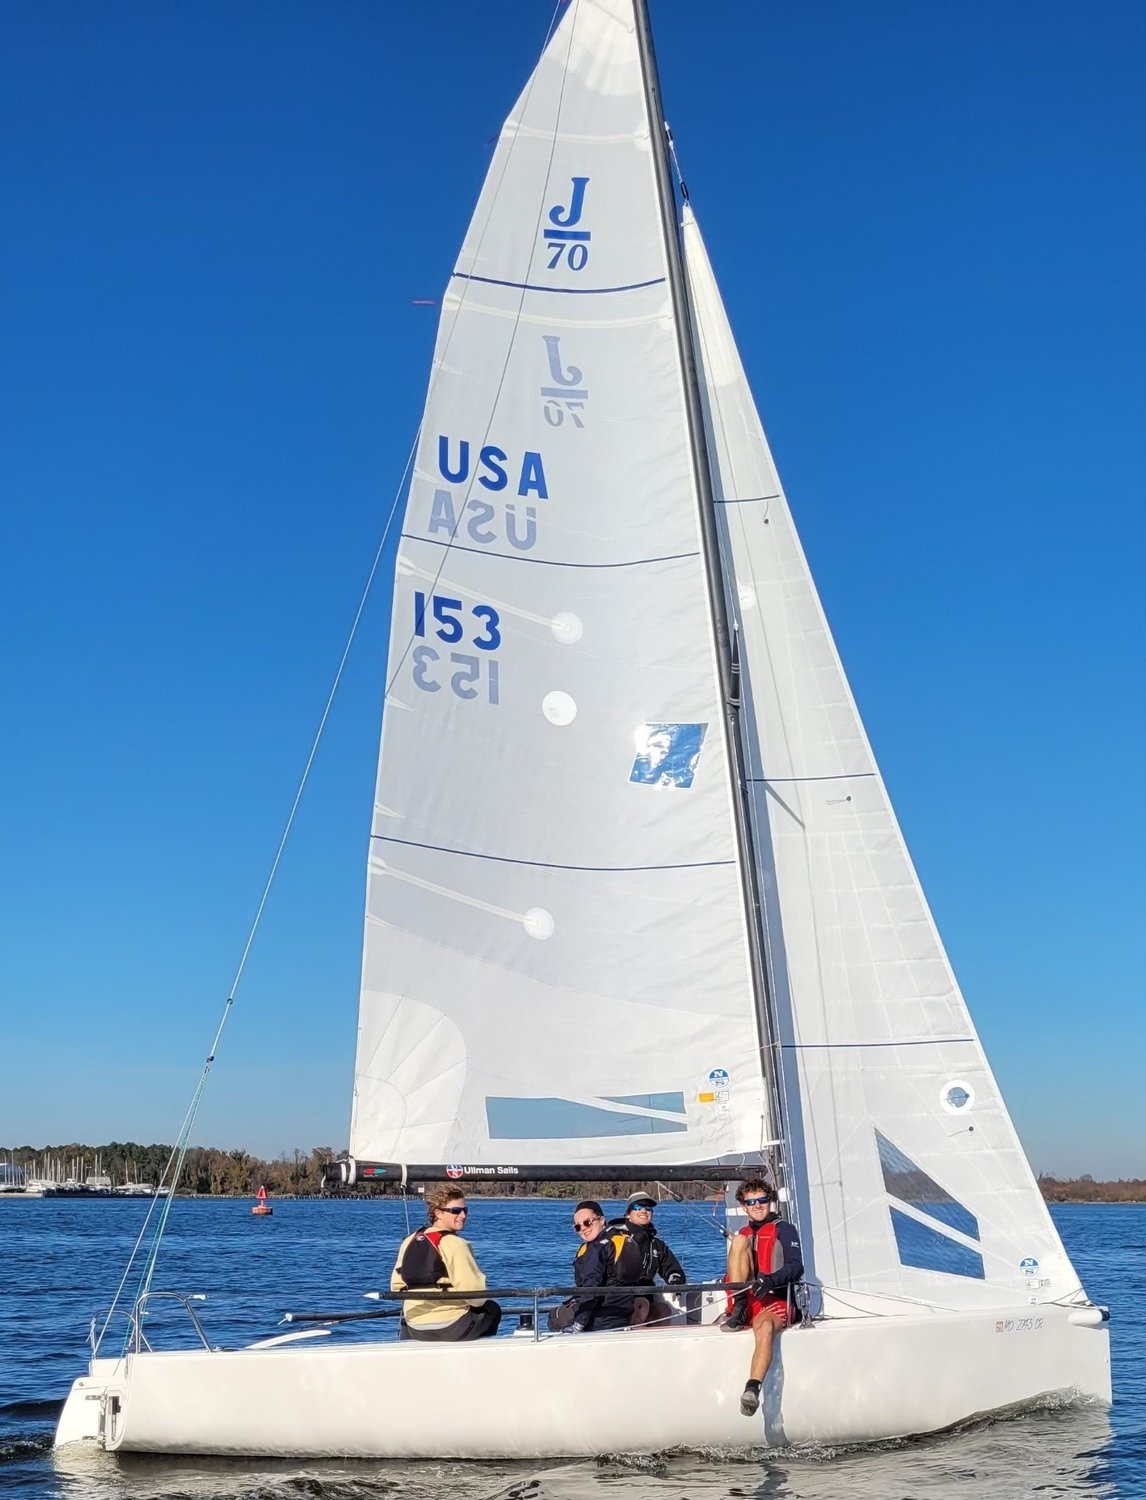 Will Harding of The Gilded Lady is pictured with Broadneck sailing team members Jonathan Weed, Anabel Chambers and Aden Keithley on a J70 at nationals in Florida.